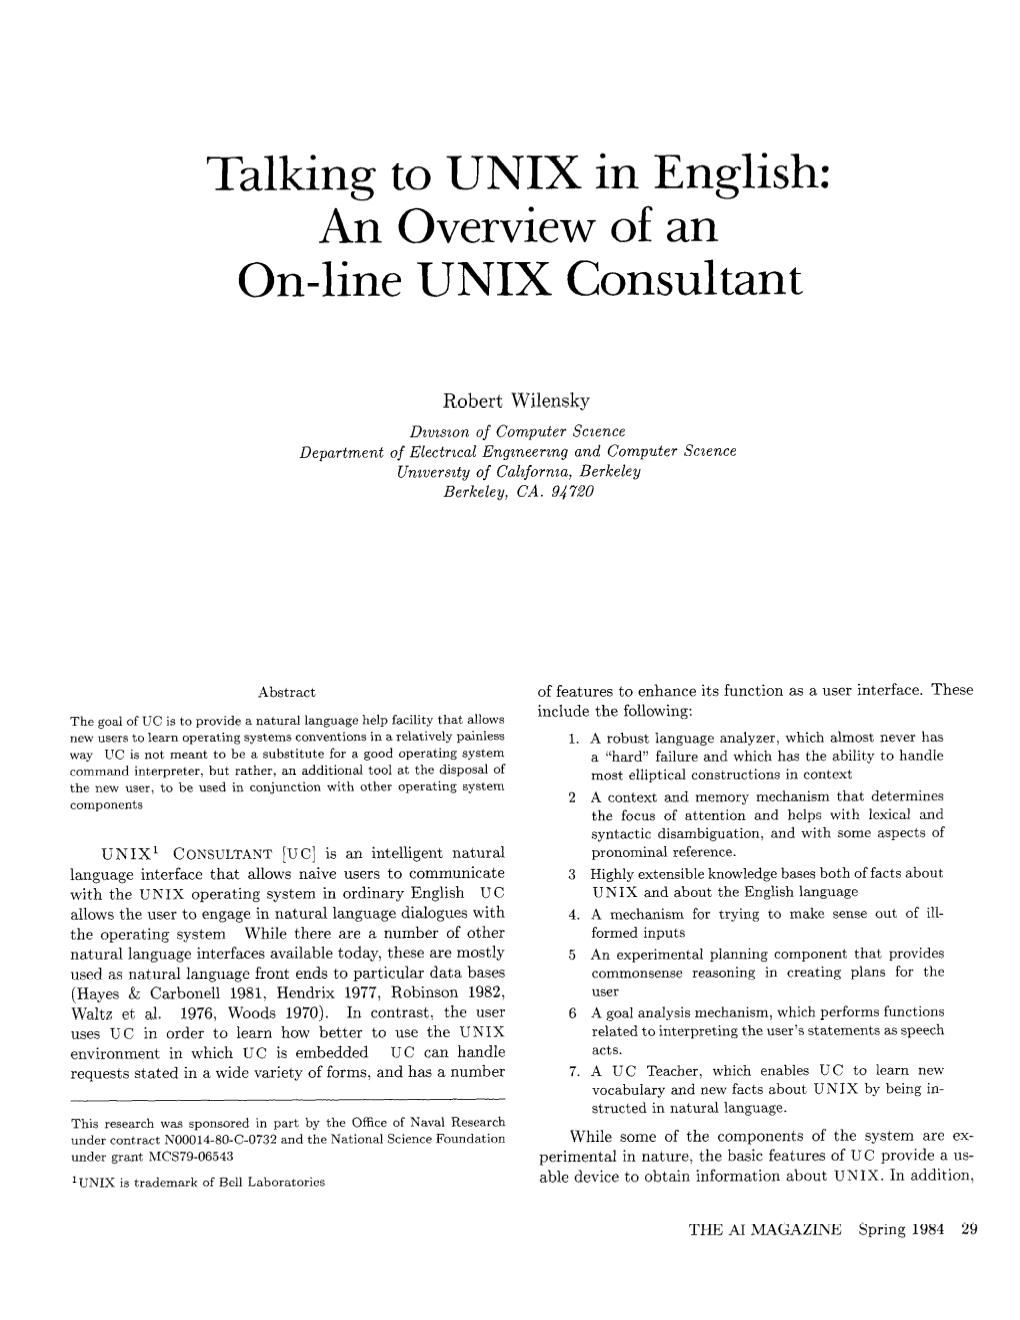 Talking to UNIX in English: an Overview of an On-Line UNIX Consultant